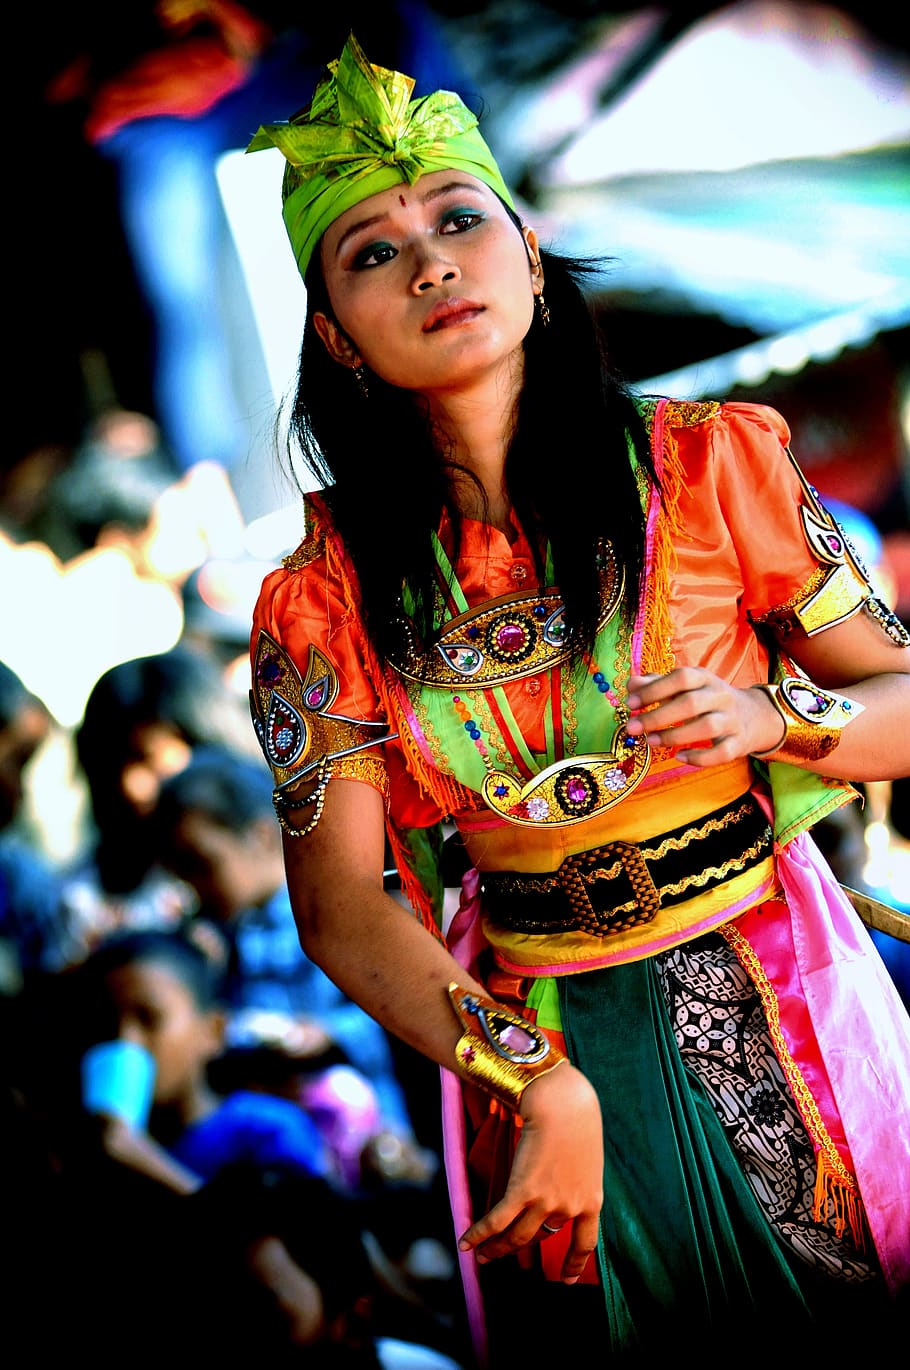 jathilan, indonesia, culture, javanese, young man, girl, performance, real people, women, arts culture and entertainment